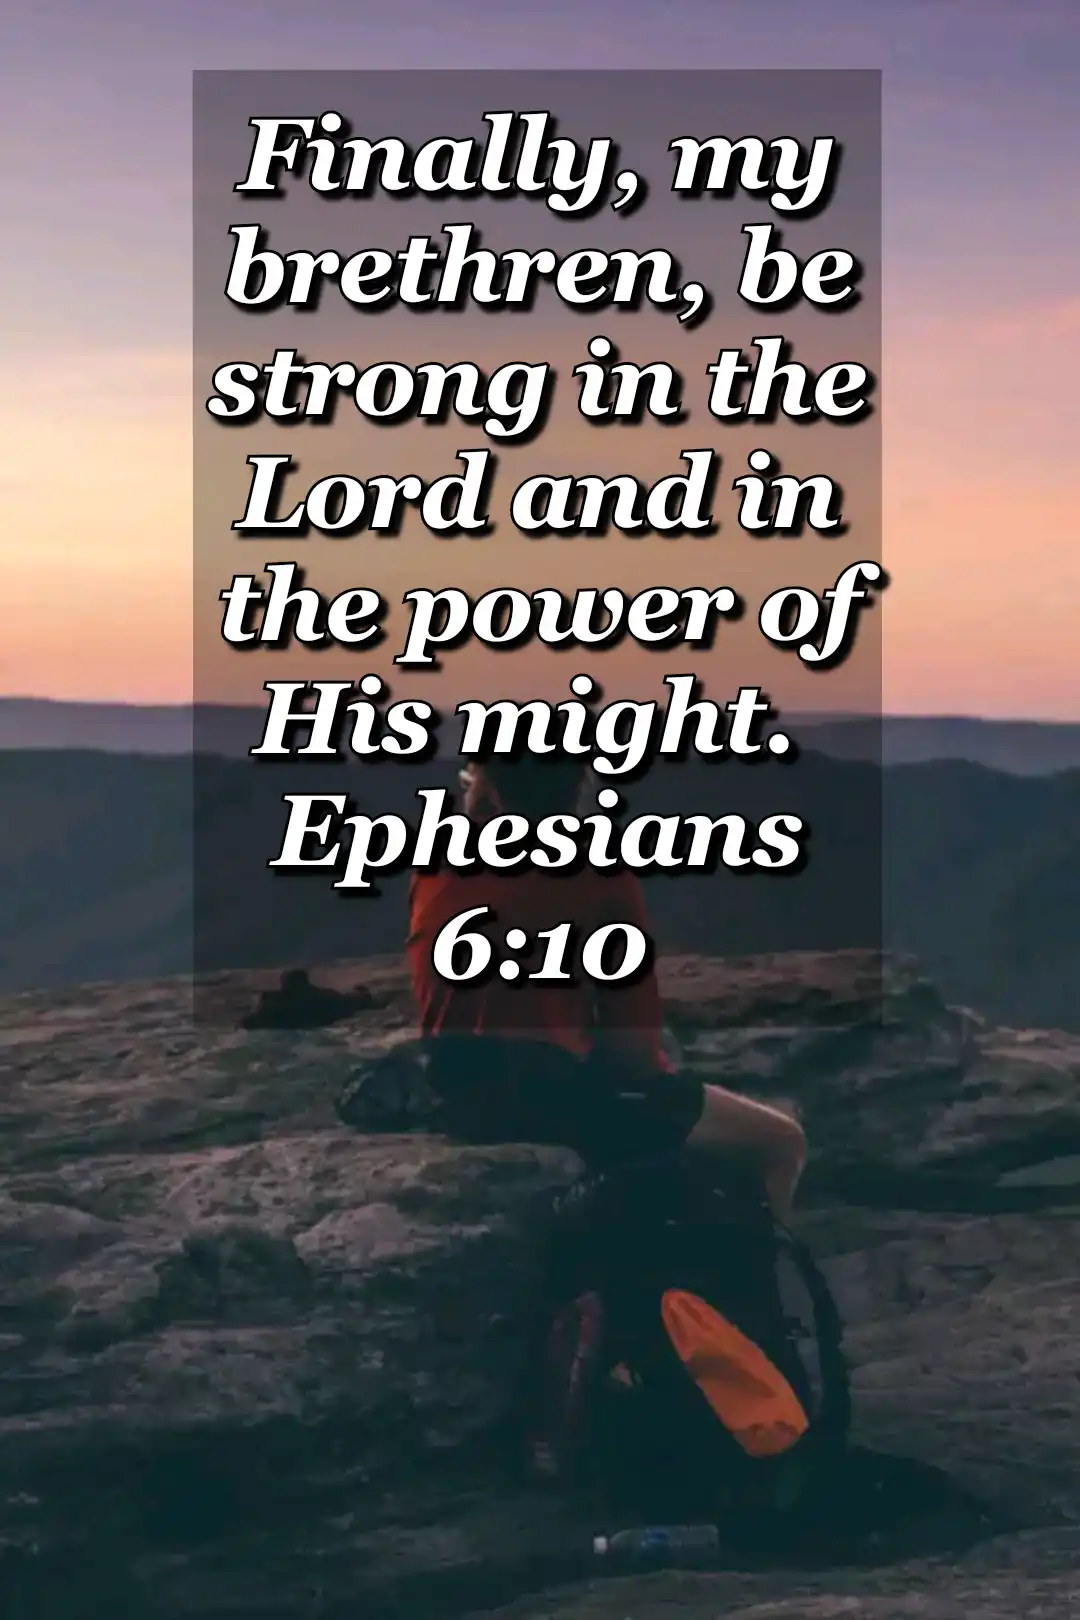 Bible-Verses-about-strength (Ephesians 6:10)